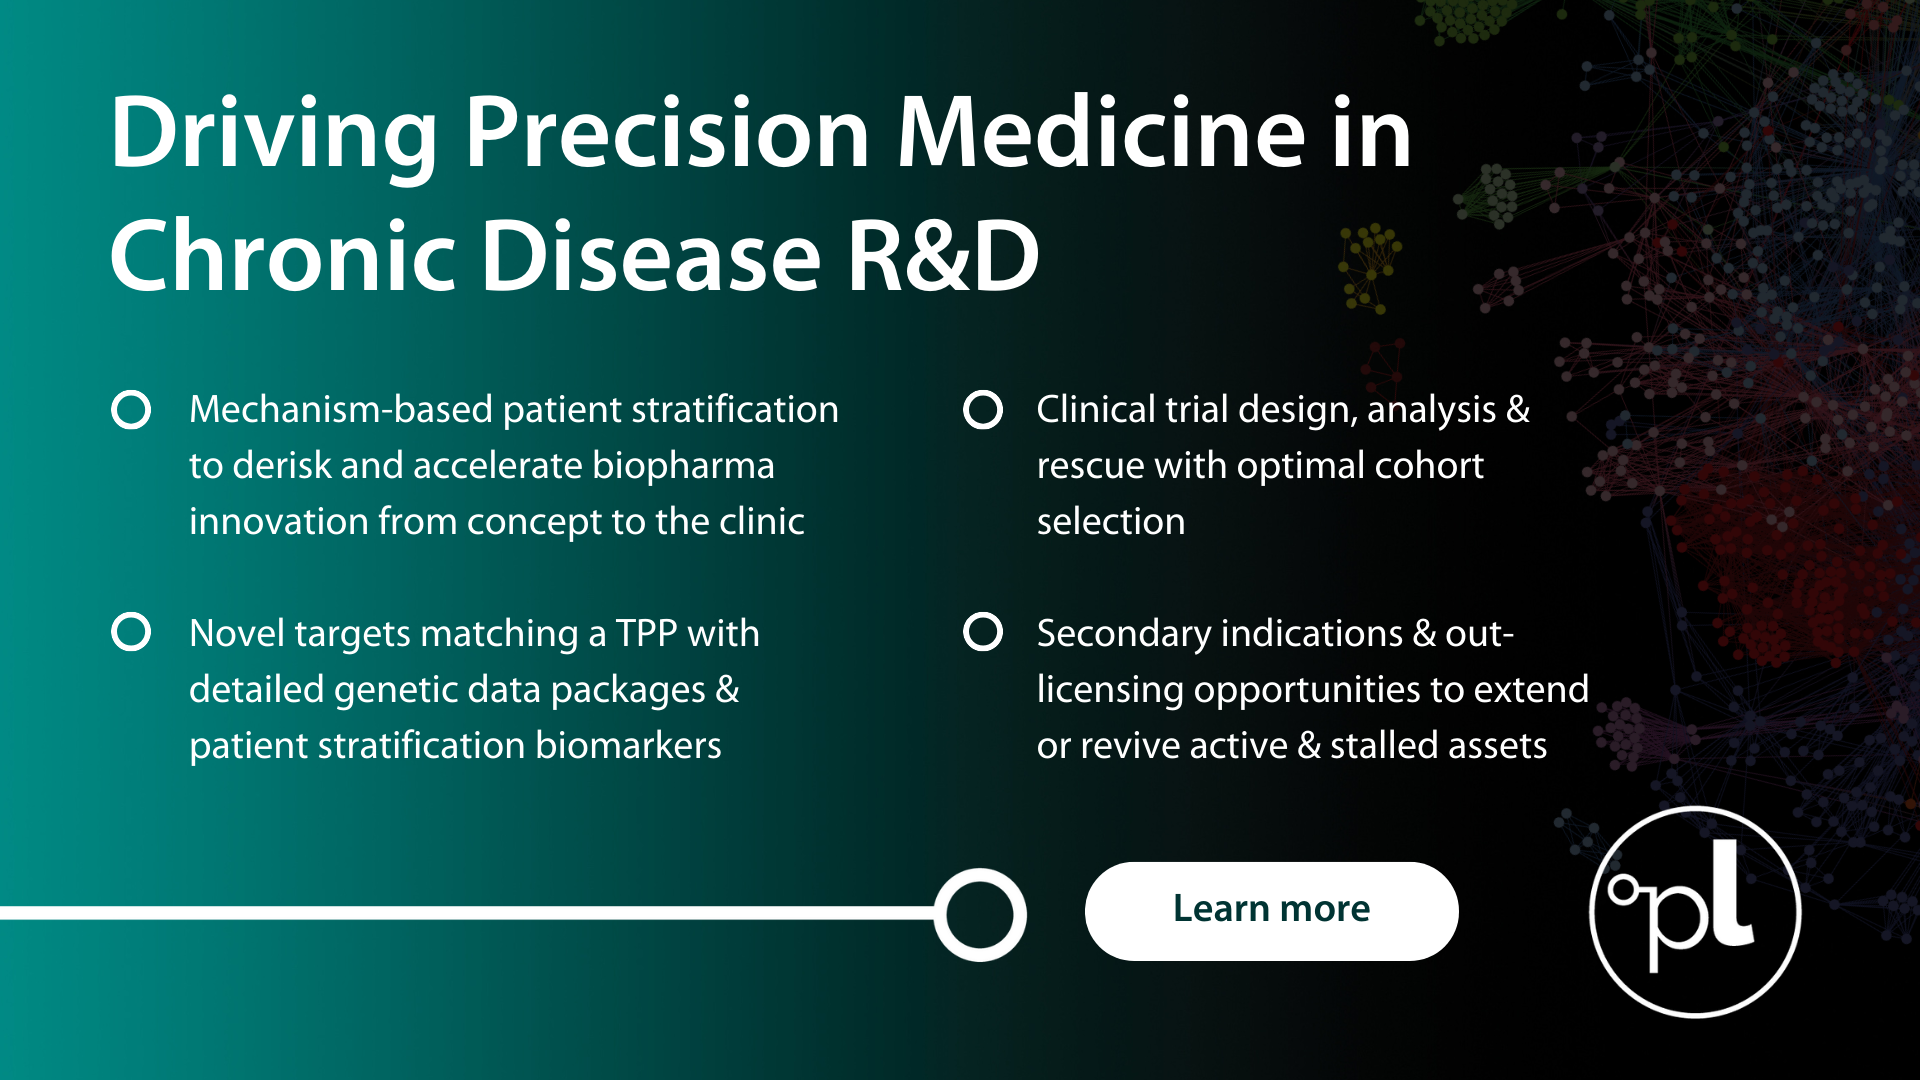 Driving precision medicine in chronic disease advert (1920 x 1080 px)